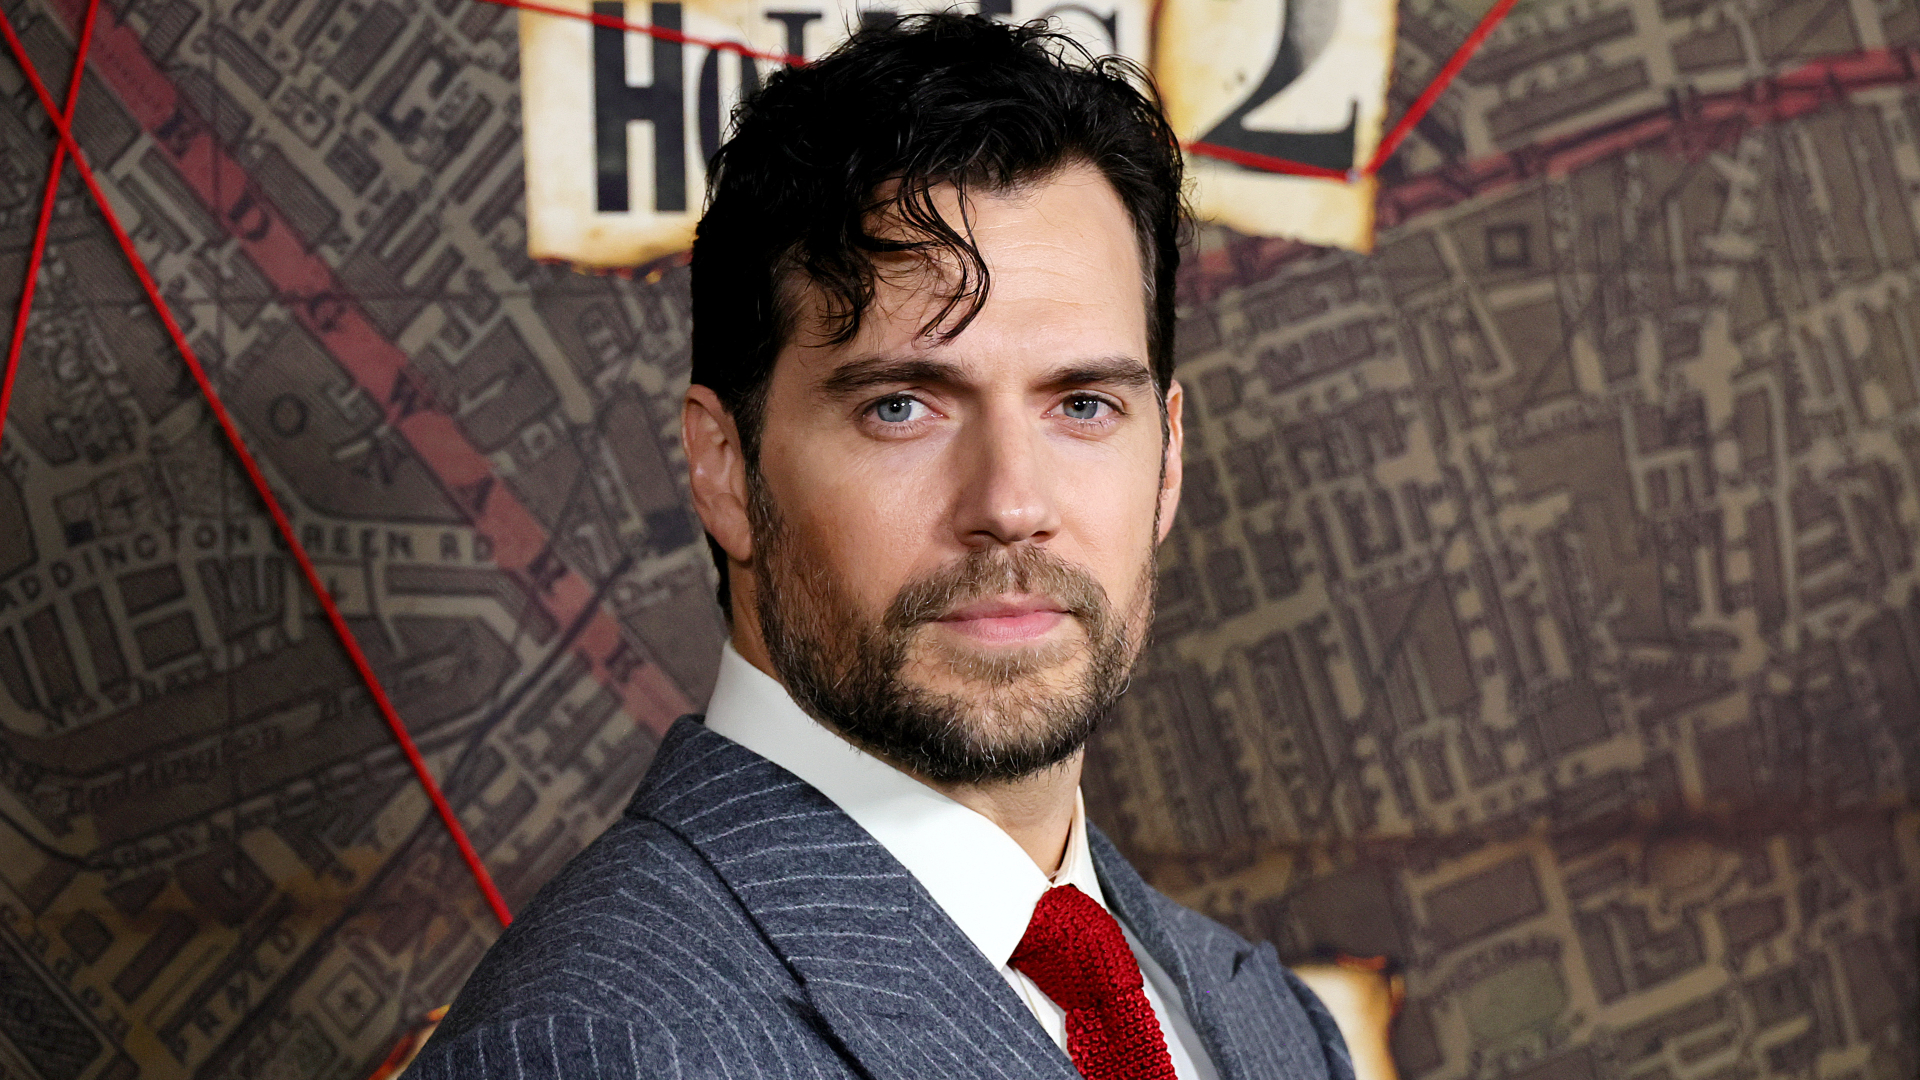 Superman' Star Henry Cavill: How I'm Preparing for 'Man of Steel' Role  (Video) – The Hollywood Reporter